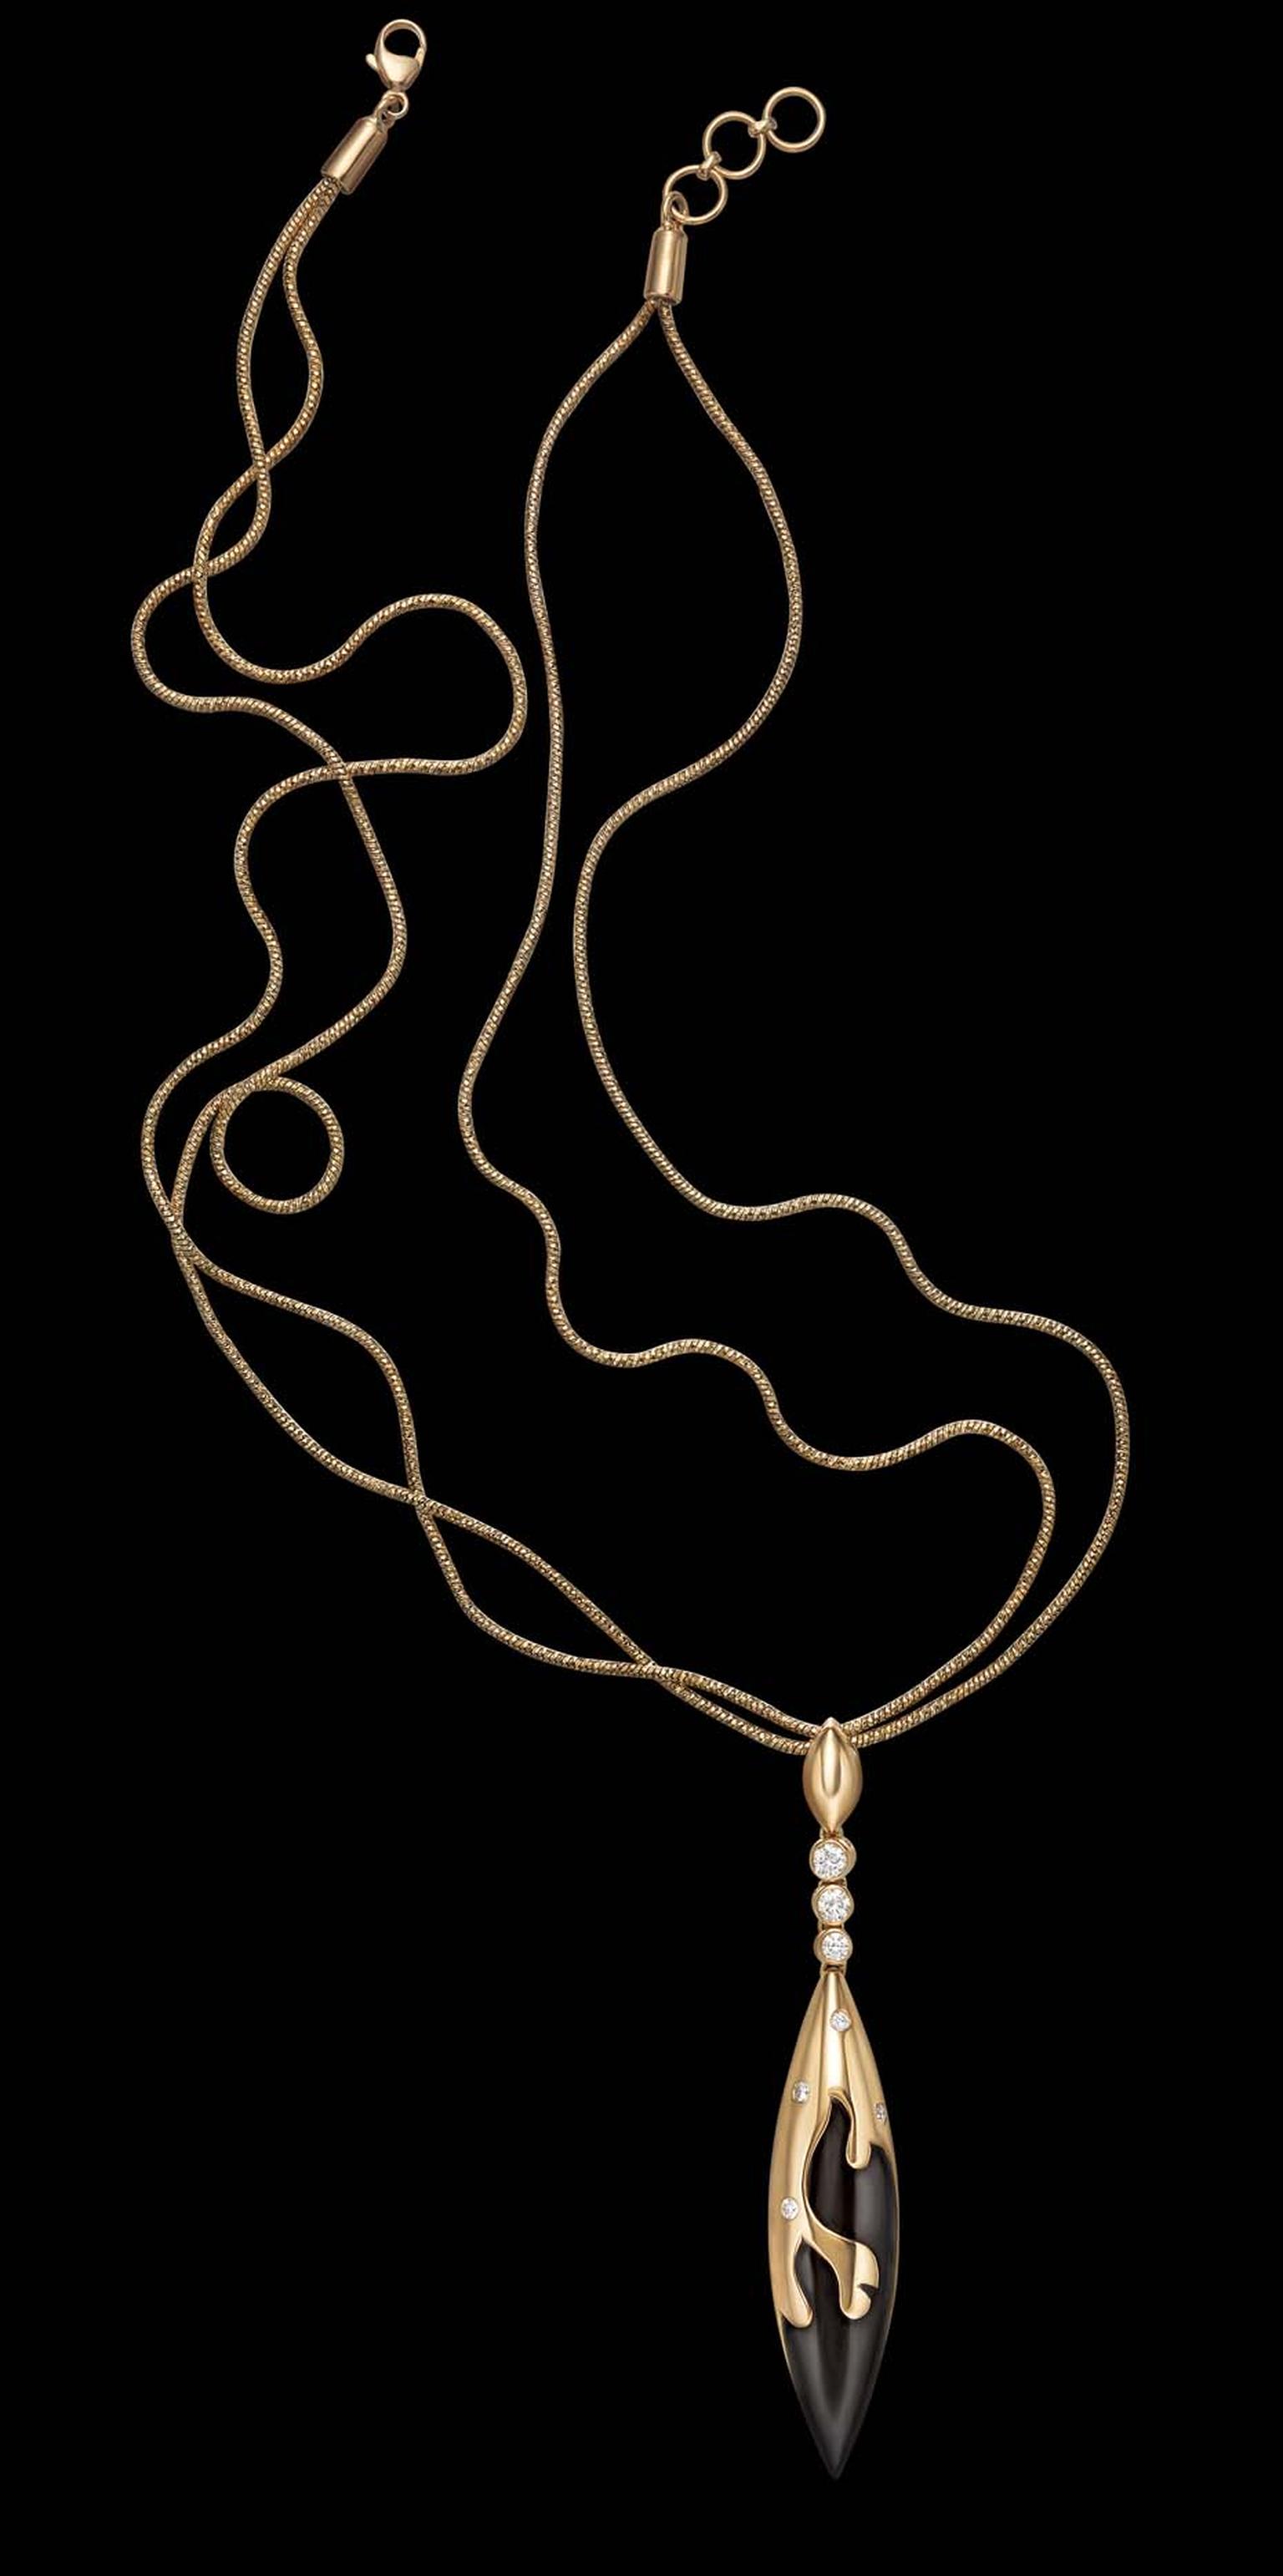 Zoya Fire collection necklace in yellow gold, inspired by the coexistence of fire and ice, set with white brilliant cut diamonds and decorated with brown enamel